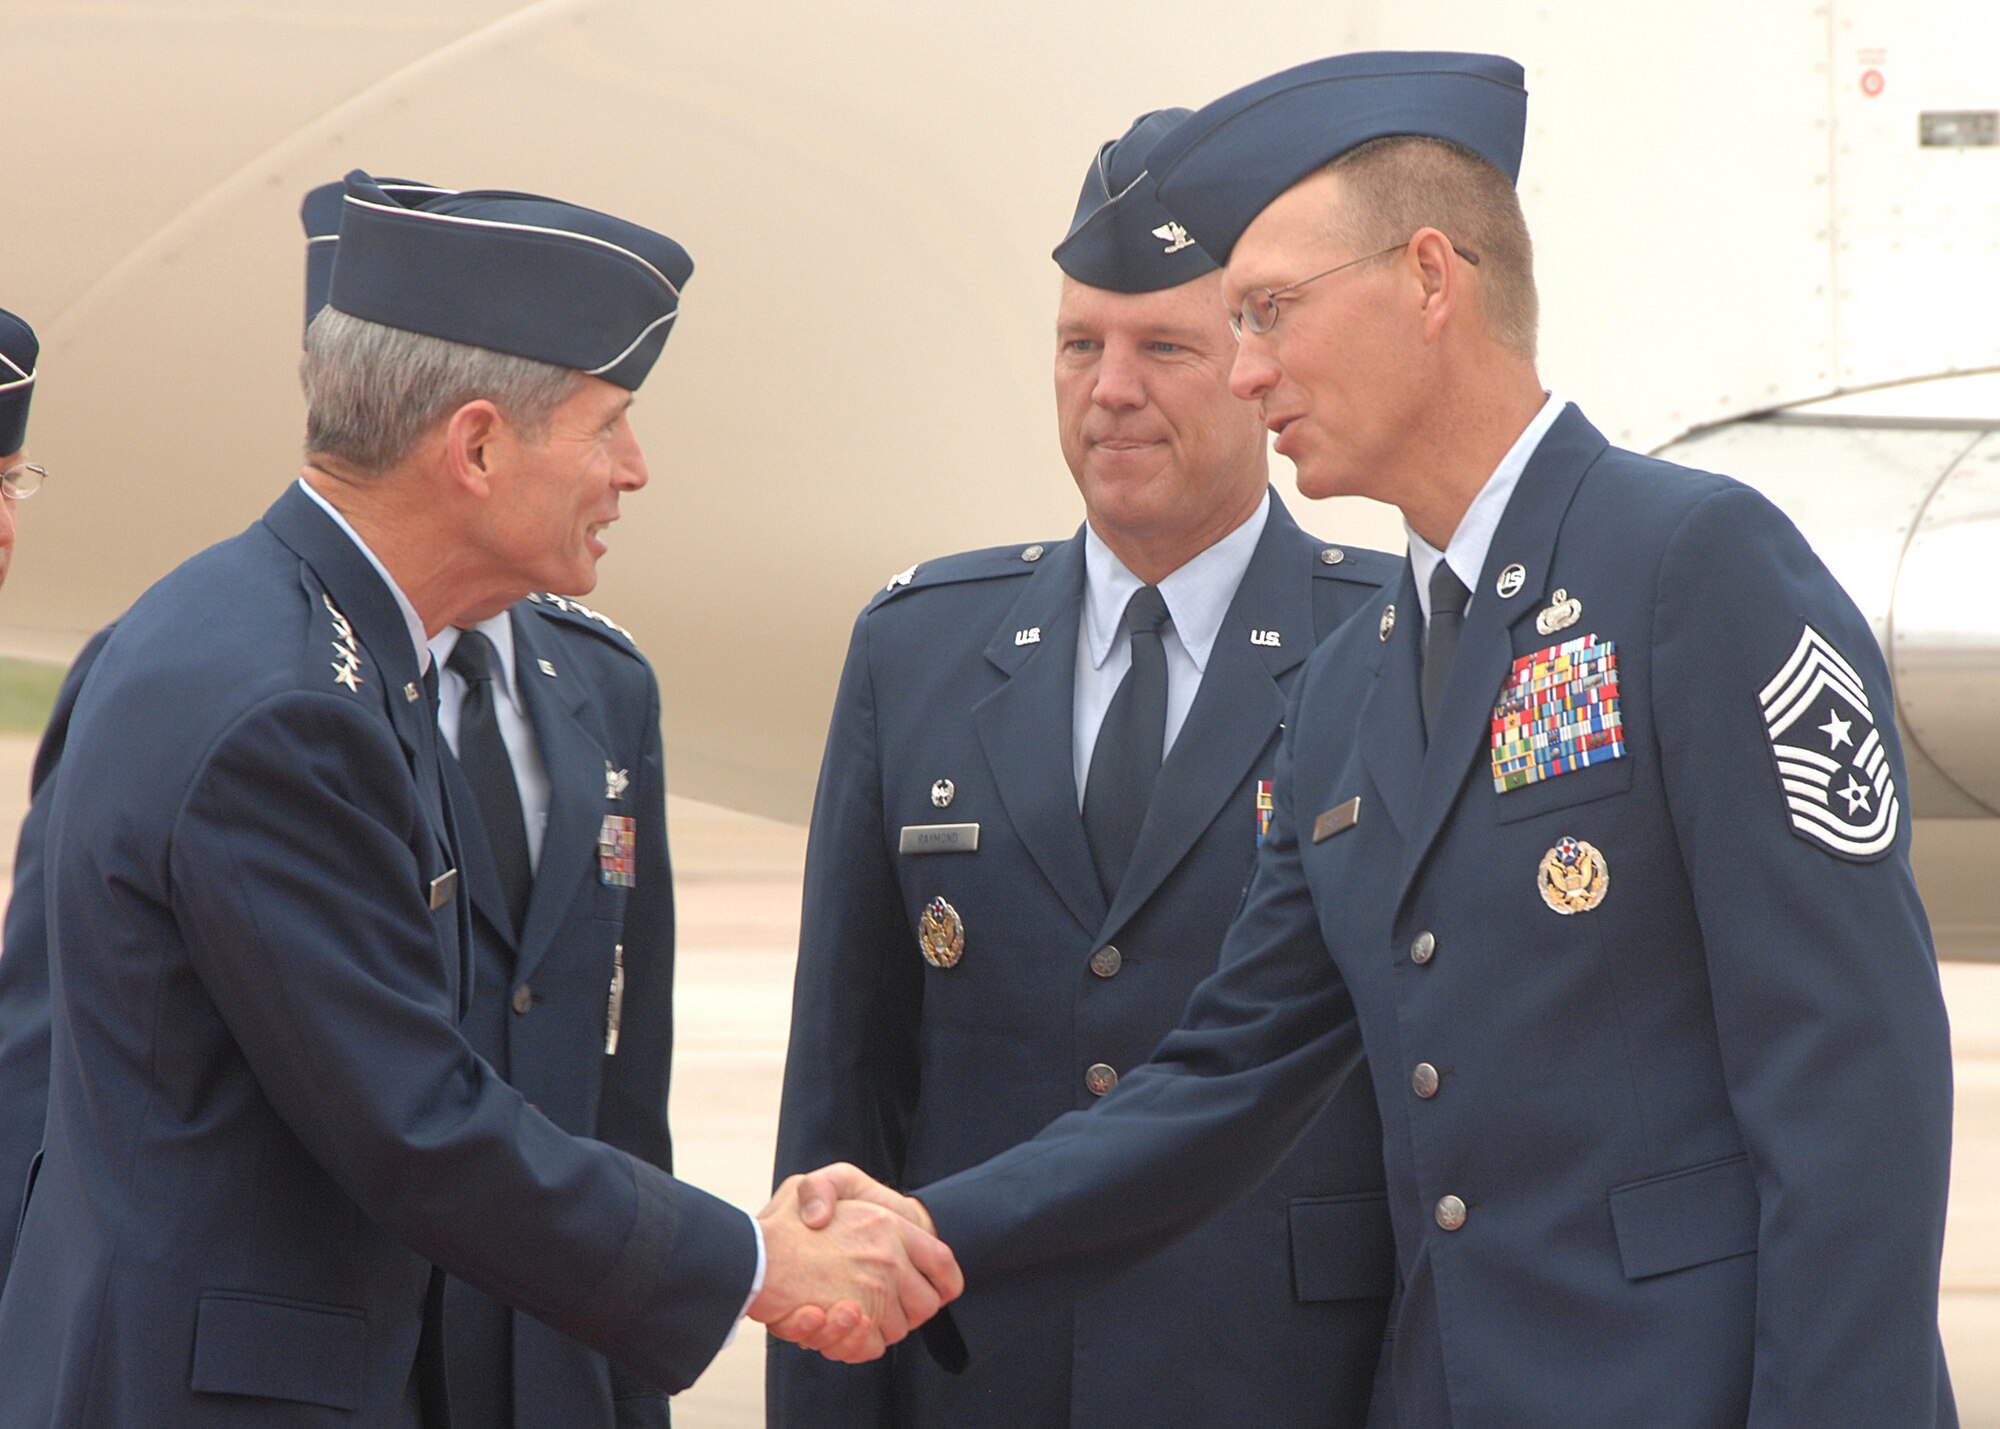 Air Force Space Command Chief Richard Small (right), and Col. Jay Raymond, 21st Space Wing commander, greet Gen. Norton Schwartz, Air Force Chief of Staff upon his arrival at Peterson Air Force Base, Colo., Sept. 2. (U.S. Air Force photo/Tech. Sgt. Matthew Lohr)